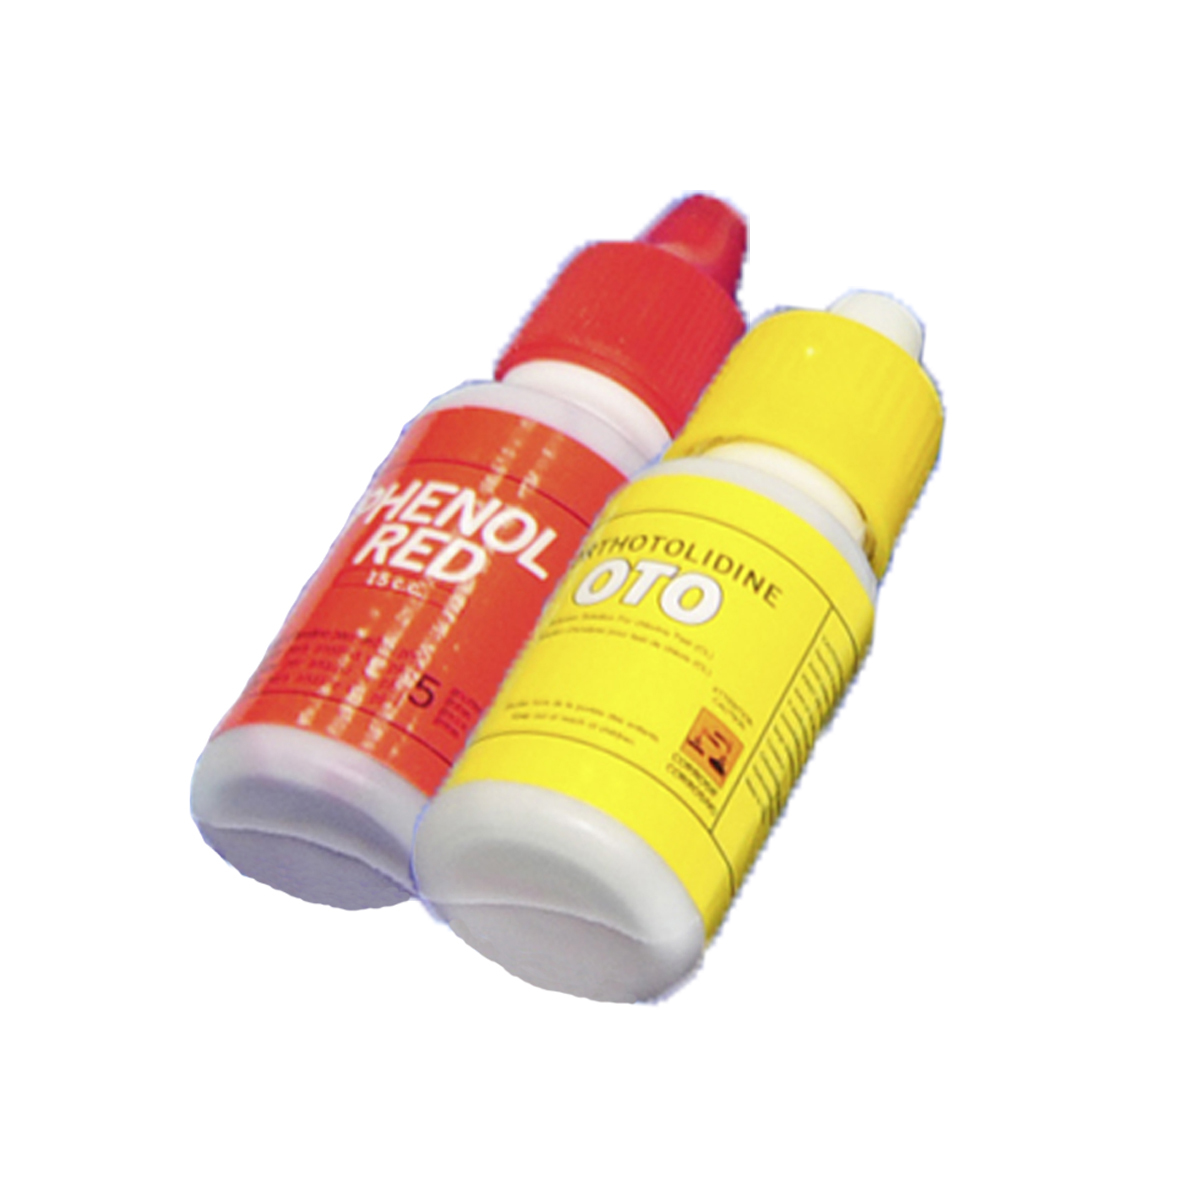 refill bottle for testkit DPD ECO liquid loose packed refill bottle for testkit DPD ECO liquid loose packed